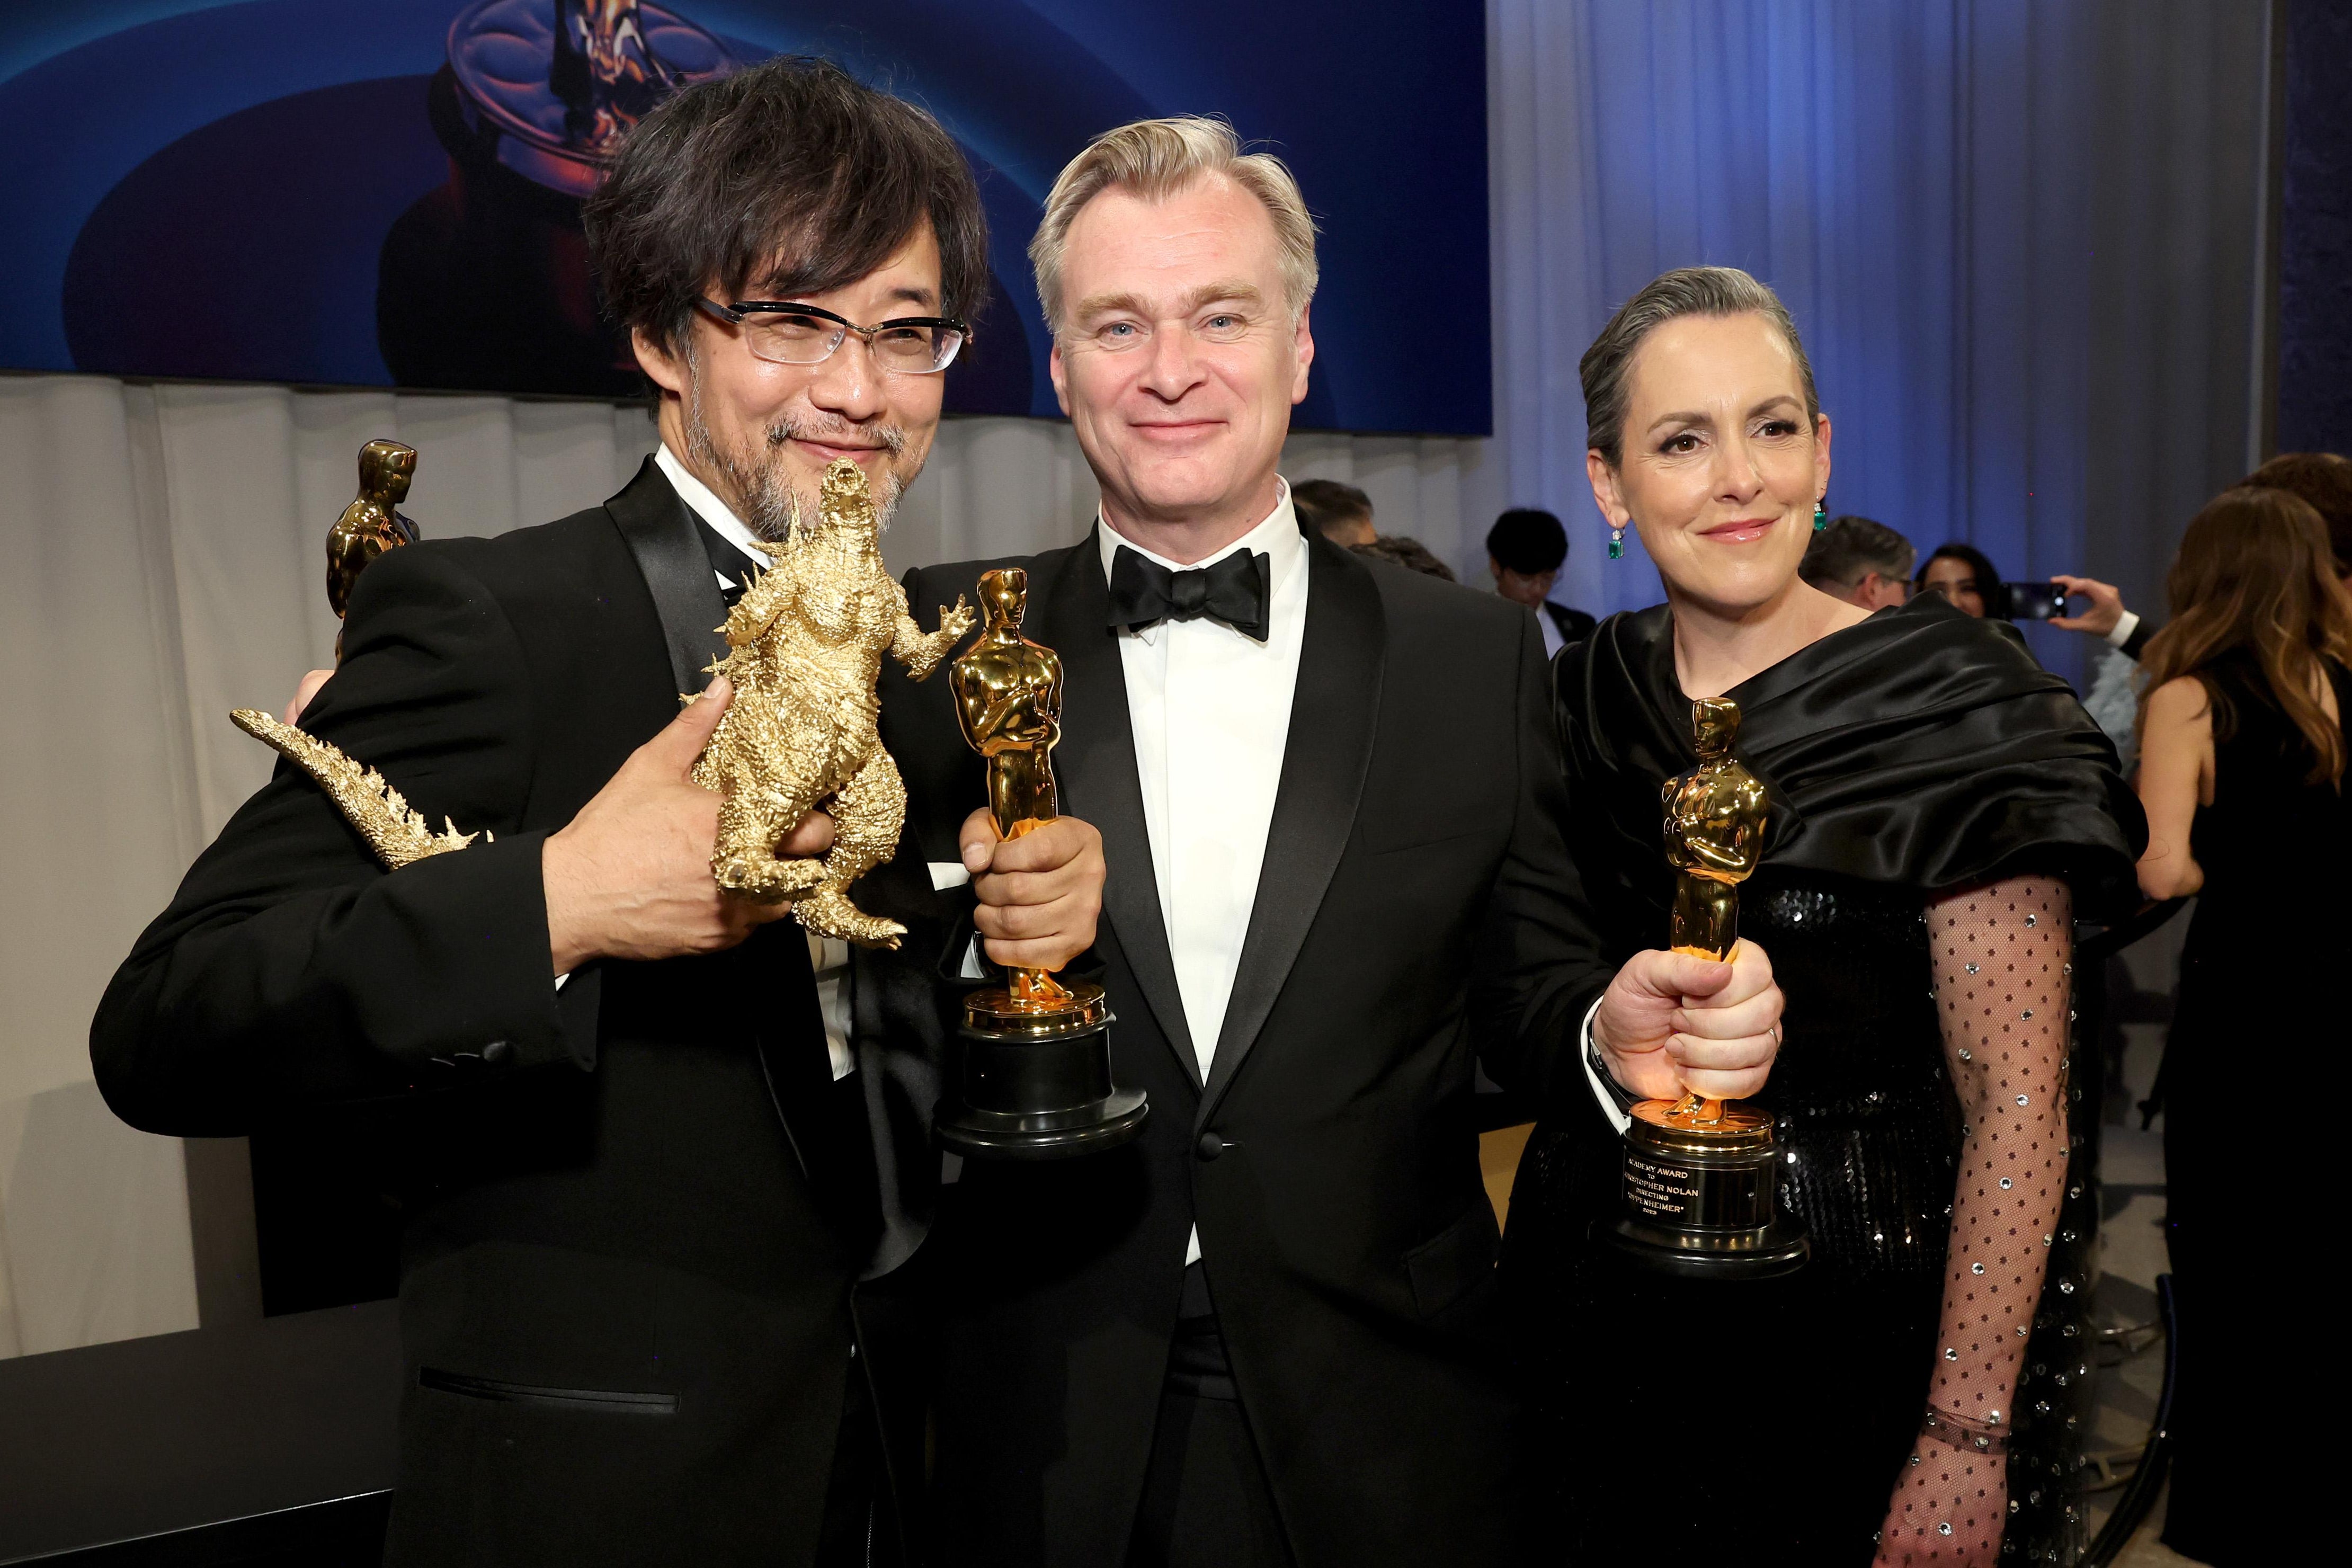 Takashi Yamazaki, winner of the Best Visual Effects award for “Godzilla Minus One,” and Christopher Nolan and Emma Thomas, winners of the Best Picture award for 'Oppenheimer,' huddle together while smiling wide and holding up their trophies. Yamazaki also holds up a little golden Godzilla.